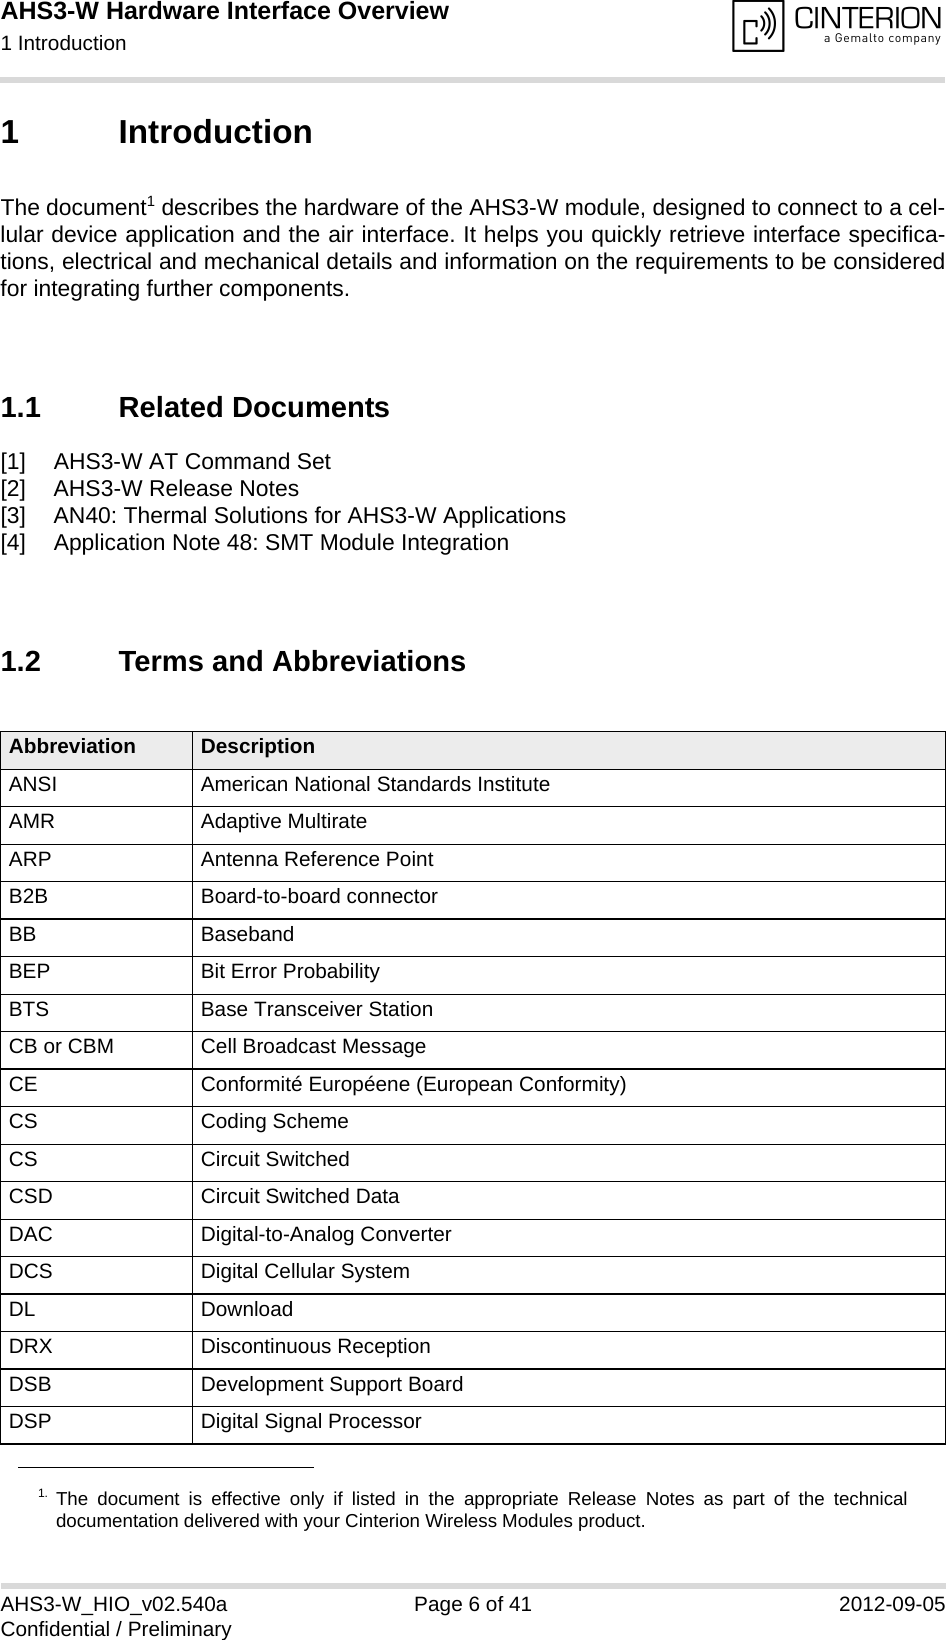 AHS3-W Hardware Interface Overview1 Introduction14AHS3-W_HIO_v02.540a Page 6 of 41 2012-09-05Confidential / Preliminary1 IntroductionThe document1 describes the hardware of the AHS3-W module, designed to connect to a cel-lular device application and the air interface. It helps you quickly retrieve interface specifica-tions, electrical and mechanical details and information on the requirements to be consideredfor integrating further components.1.1 Related Documents[1] AHS3-W AT Command Set[2] AHS3-W Release Notes[3] AN40: Thermal Solutions for AHS3-W Applications [4] Application Note 48: SMT Module Integration 1.2 Terms and Abbreviations1. The document is effective only if listed in the appropriate Release Notes as part of the technicaldocumentation delivered with your Cinterion Wireless Modules product.Abbreviation DescriptionANSI American National Standards InstituteAMR Adaptive MultirateARP Antenna Reference PointB2B Board-to-board connectorBB BasebandBEP Bit Error ProbabilityBTS Base Transceiver StationCB or CBM Cell Broadcast MessageCE Conformité Européene (European Conformity)CS Coding SchemeCS Circuit SwitchedCSD Circuit Switched DataDAC Digital-to-Analog ConverterDCS Digital Cellular SystemDL DownloadDRX Discontinuous ReceptionDSB Development Support BoardDSP Digital Signal Processor